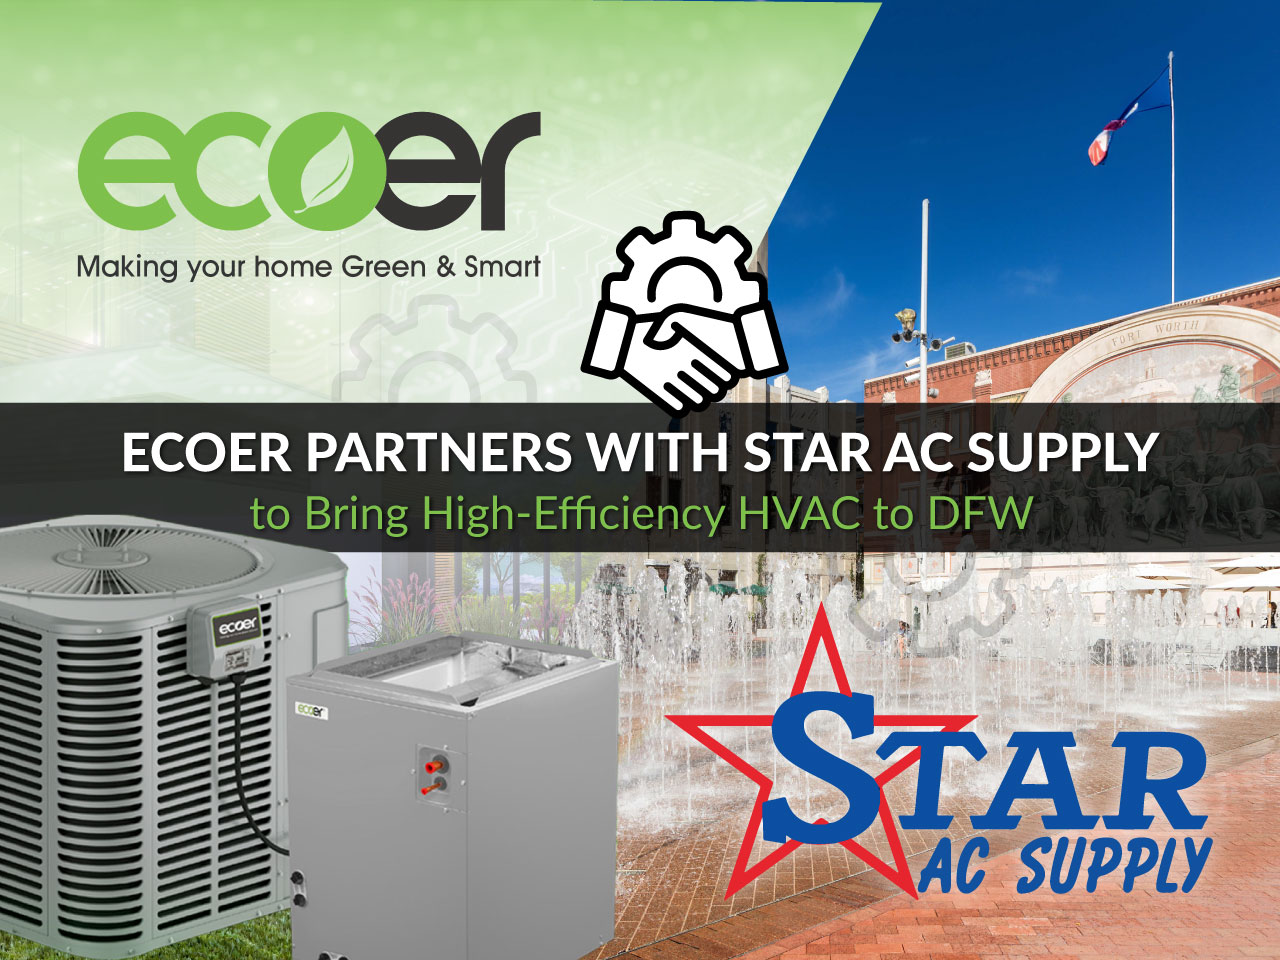 Ecoer Partners with Star AC Supply to Distribute High-Efficiency HVAC Equipment in DFW Area